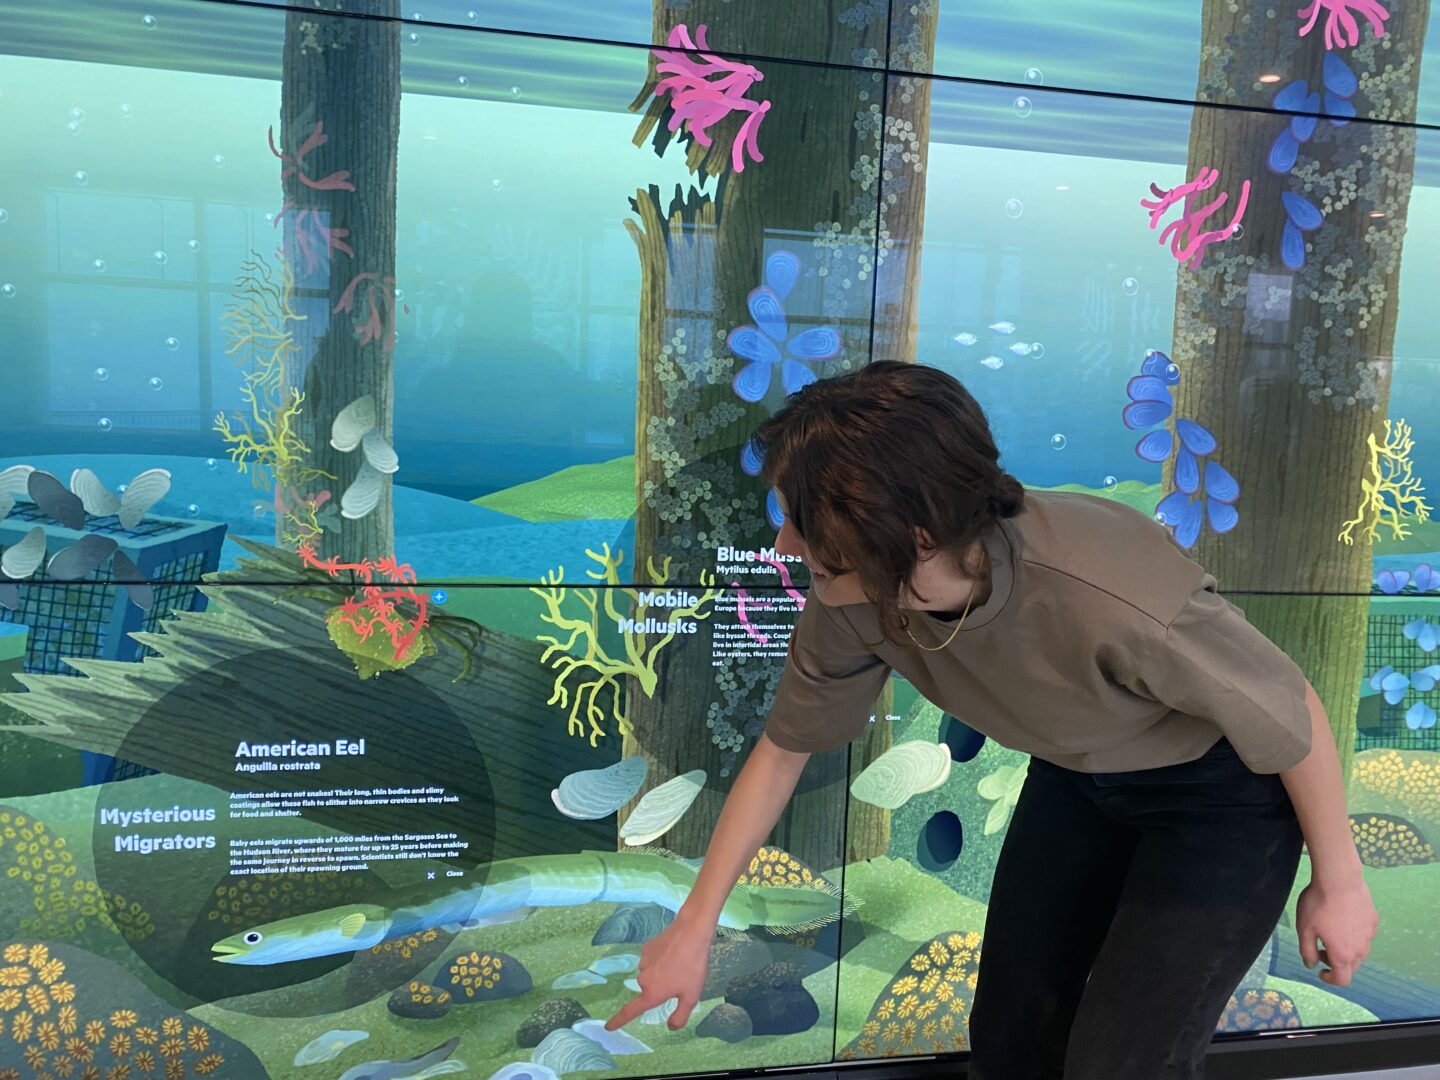 Playing with interactive features at the Discovery Tank at Pier 57